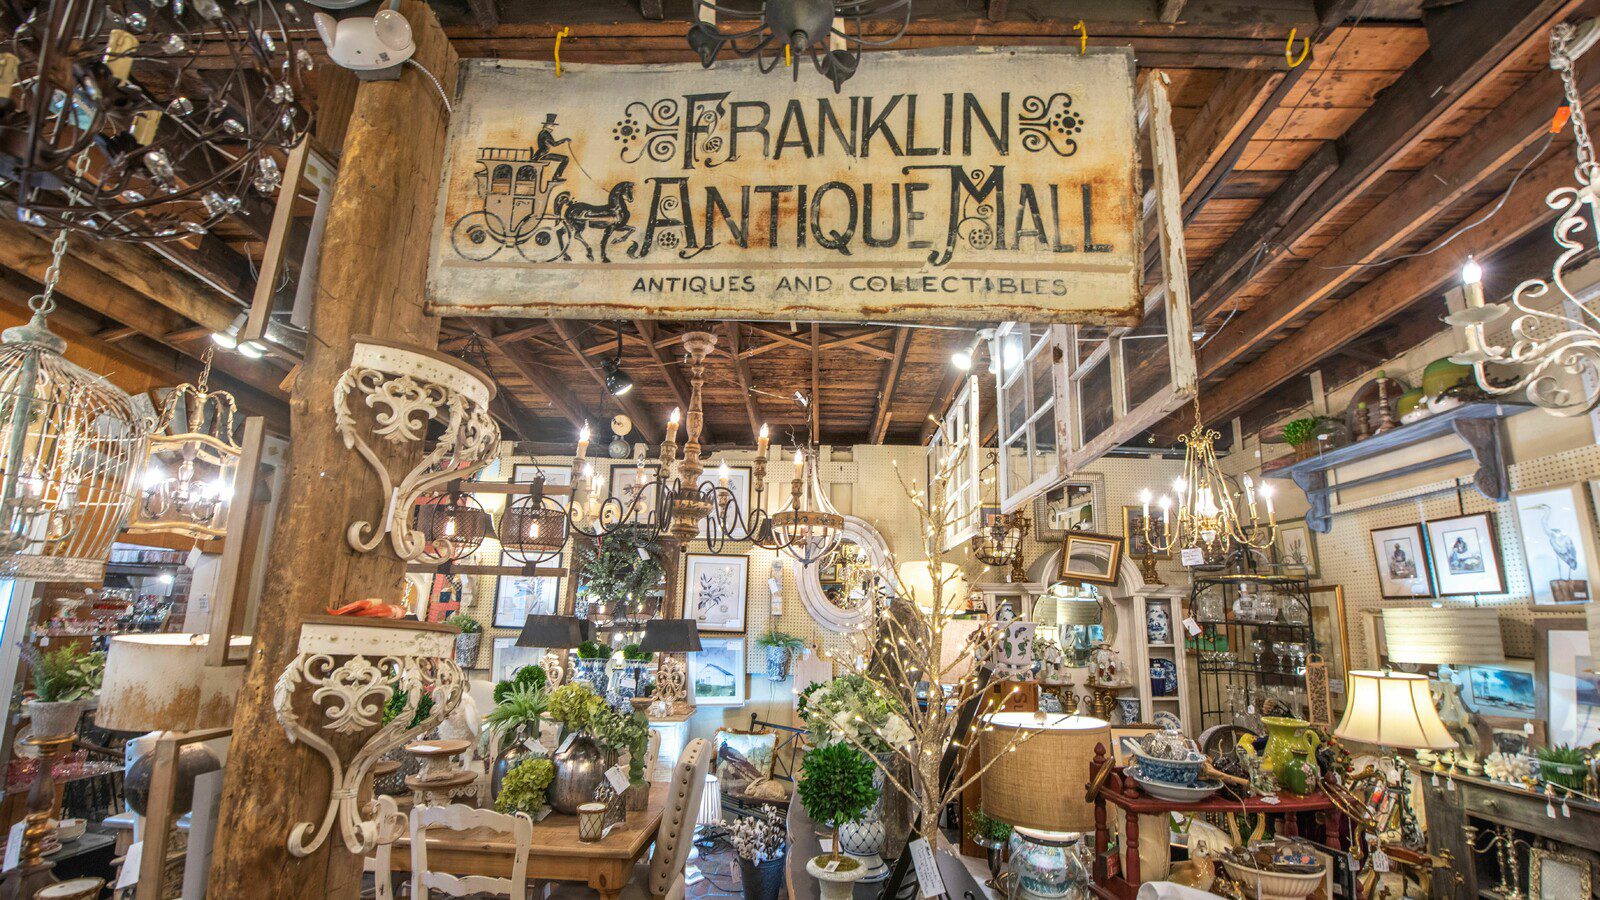 Franklin Antique Mall, Antiques & Collectibles in Downtown Franklin, TN.